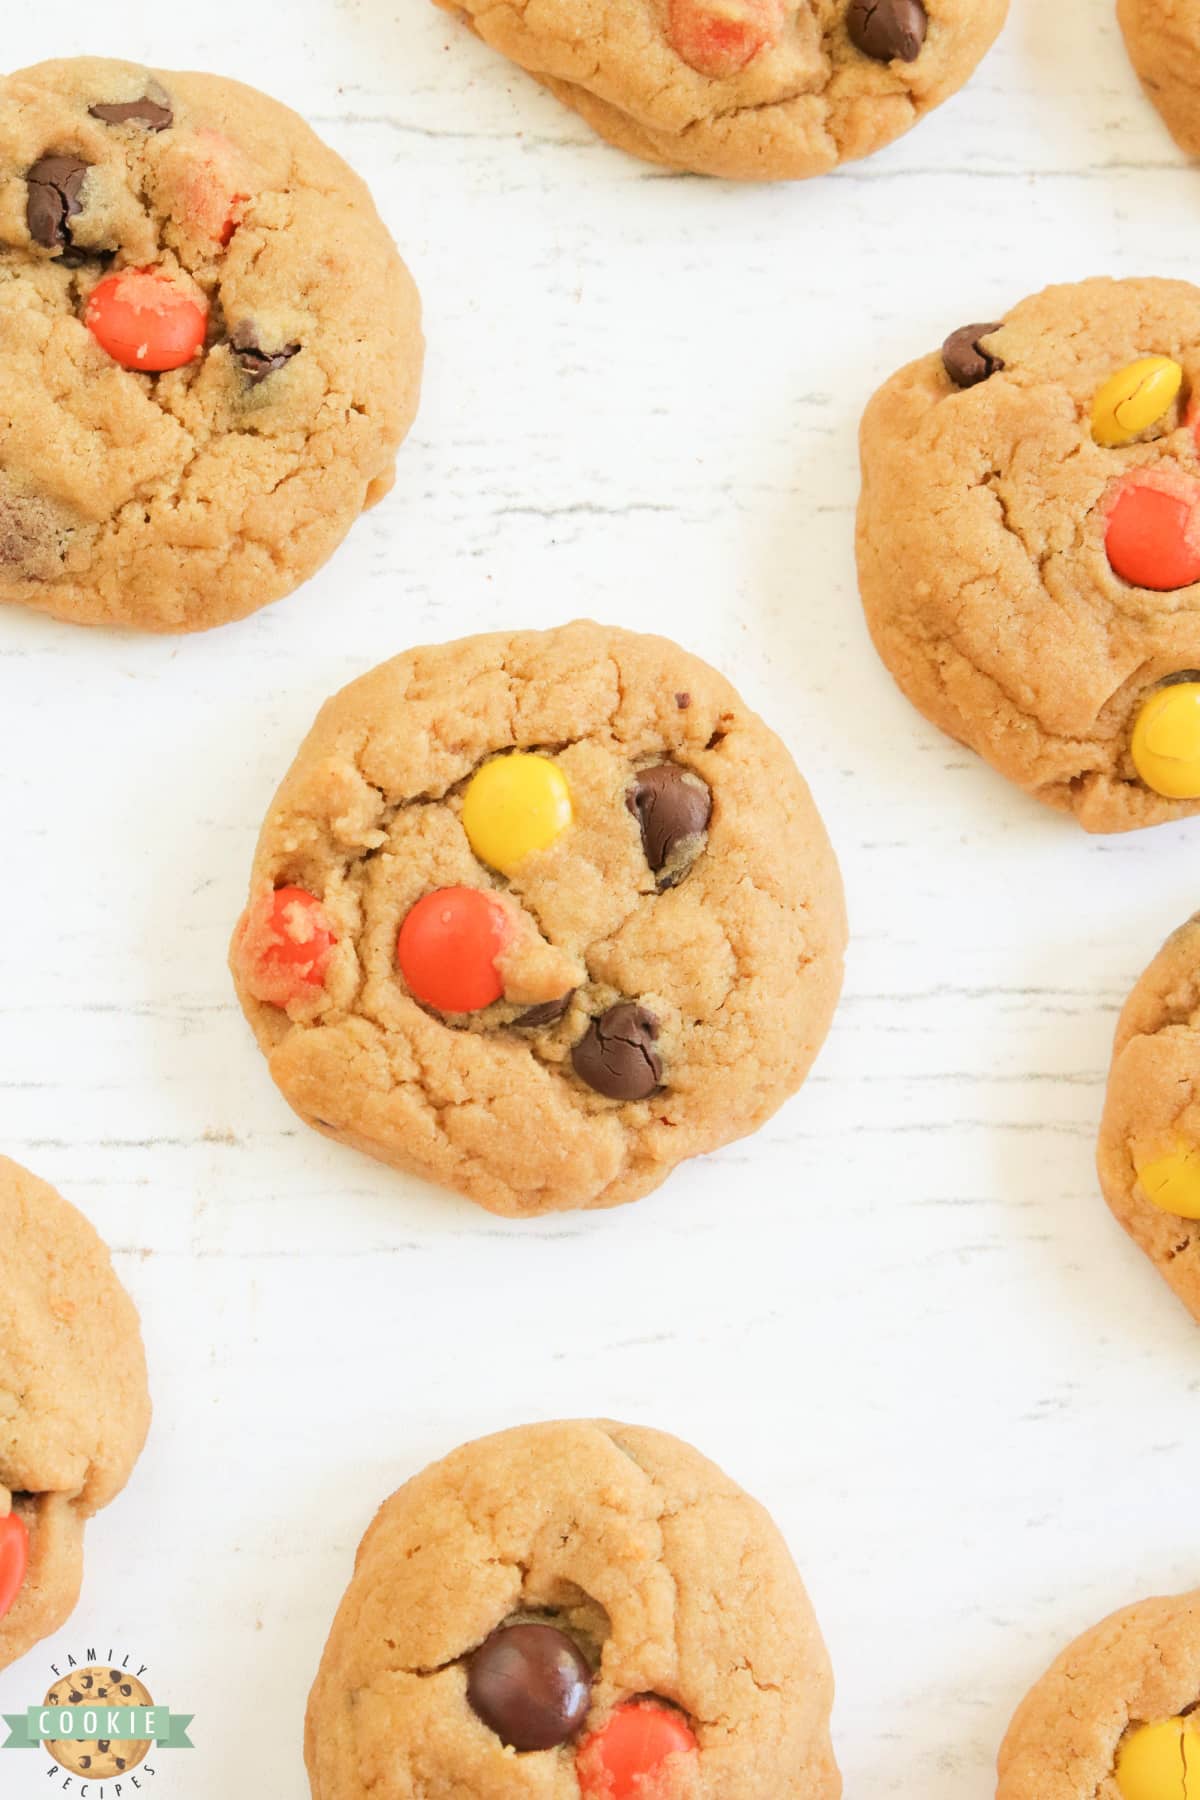 Cream Cheese Peanut Butter Cookies are soft, chewy and packed with peanut butter! Made with Reese's pieces, these peanut butter cookies turn out perfectly every time.